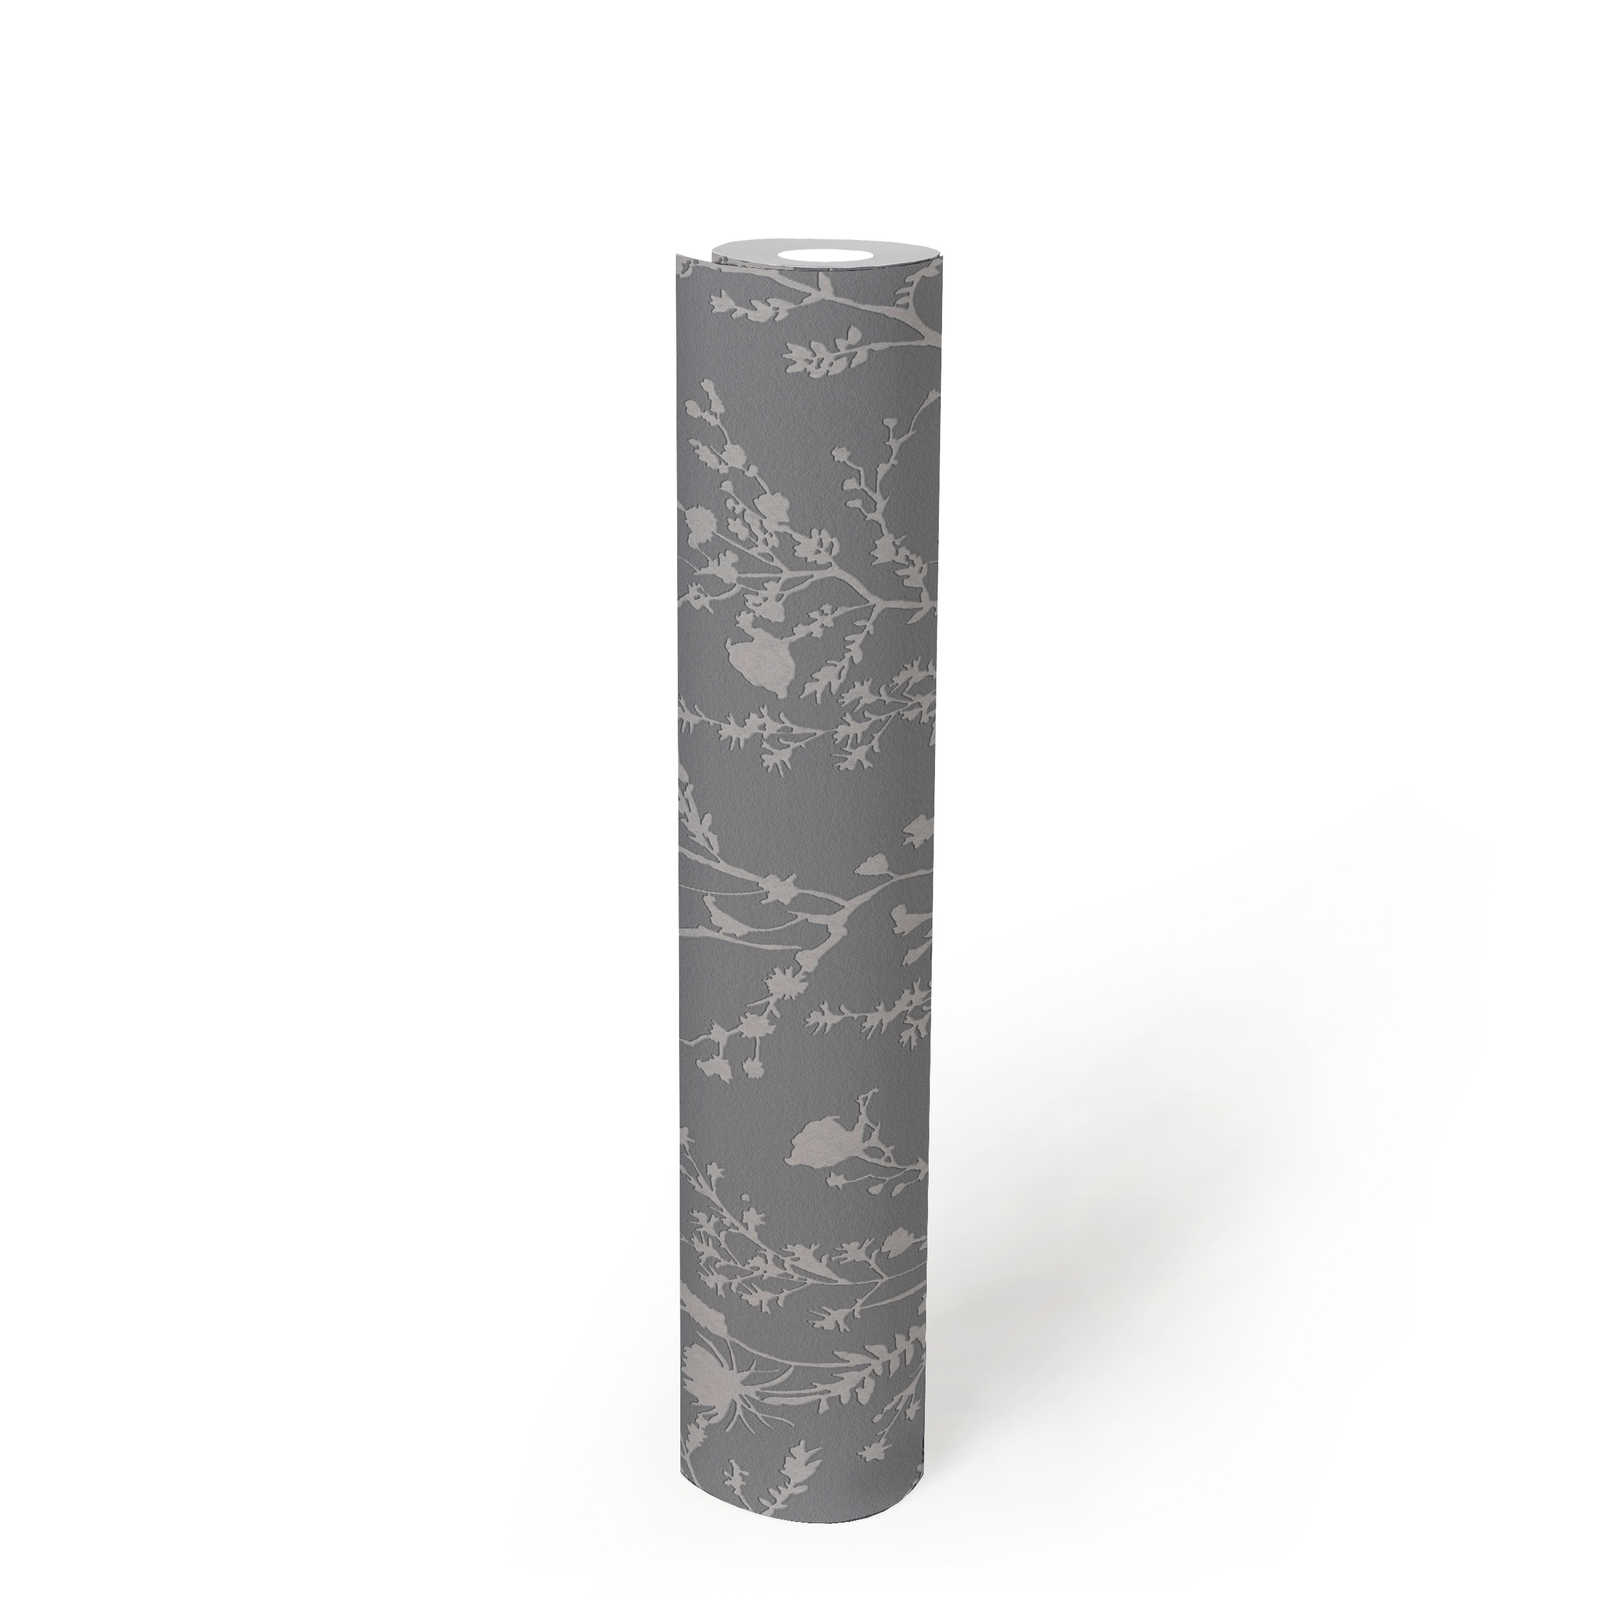             Floral wallpaper with soft grasses and blossoms pattern - grey, silver
        